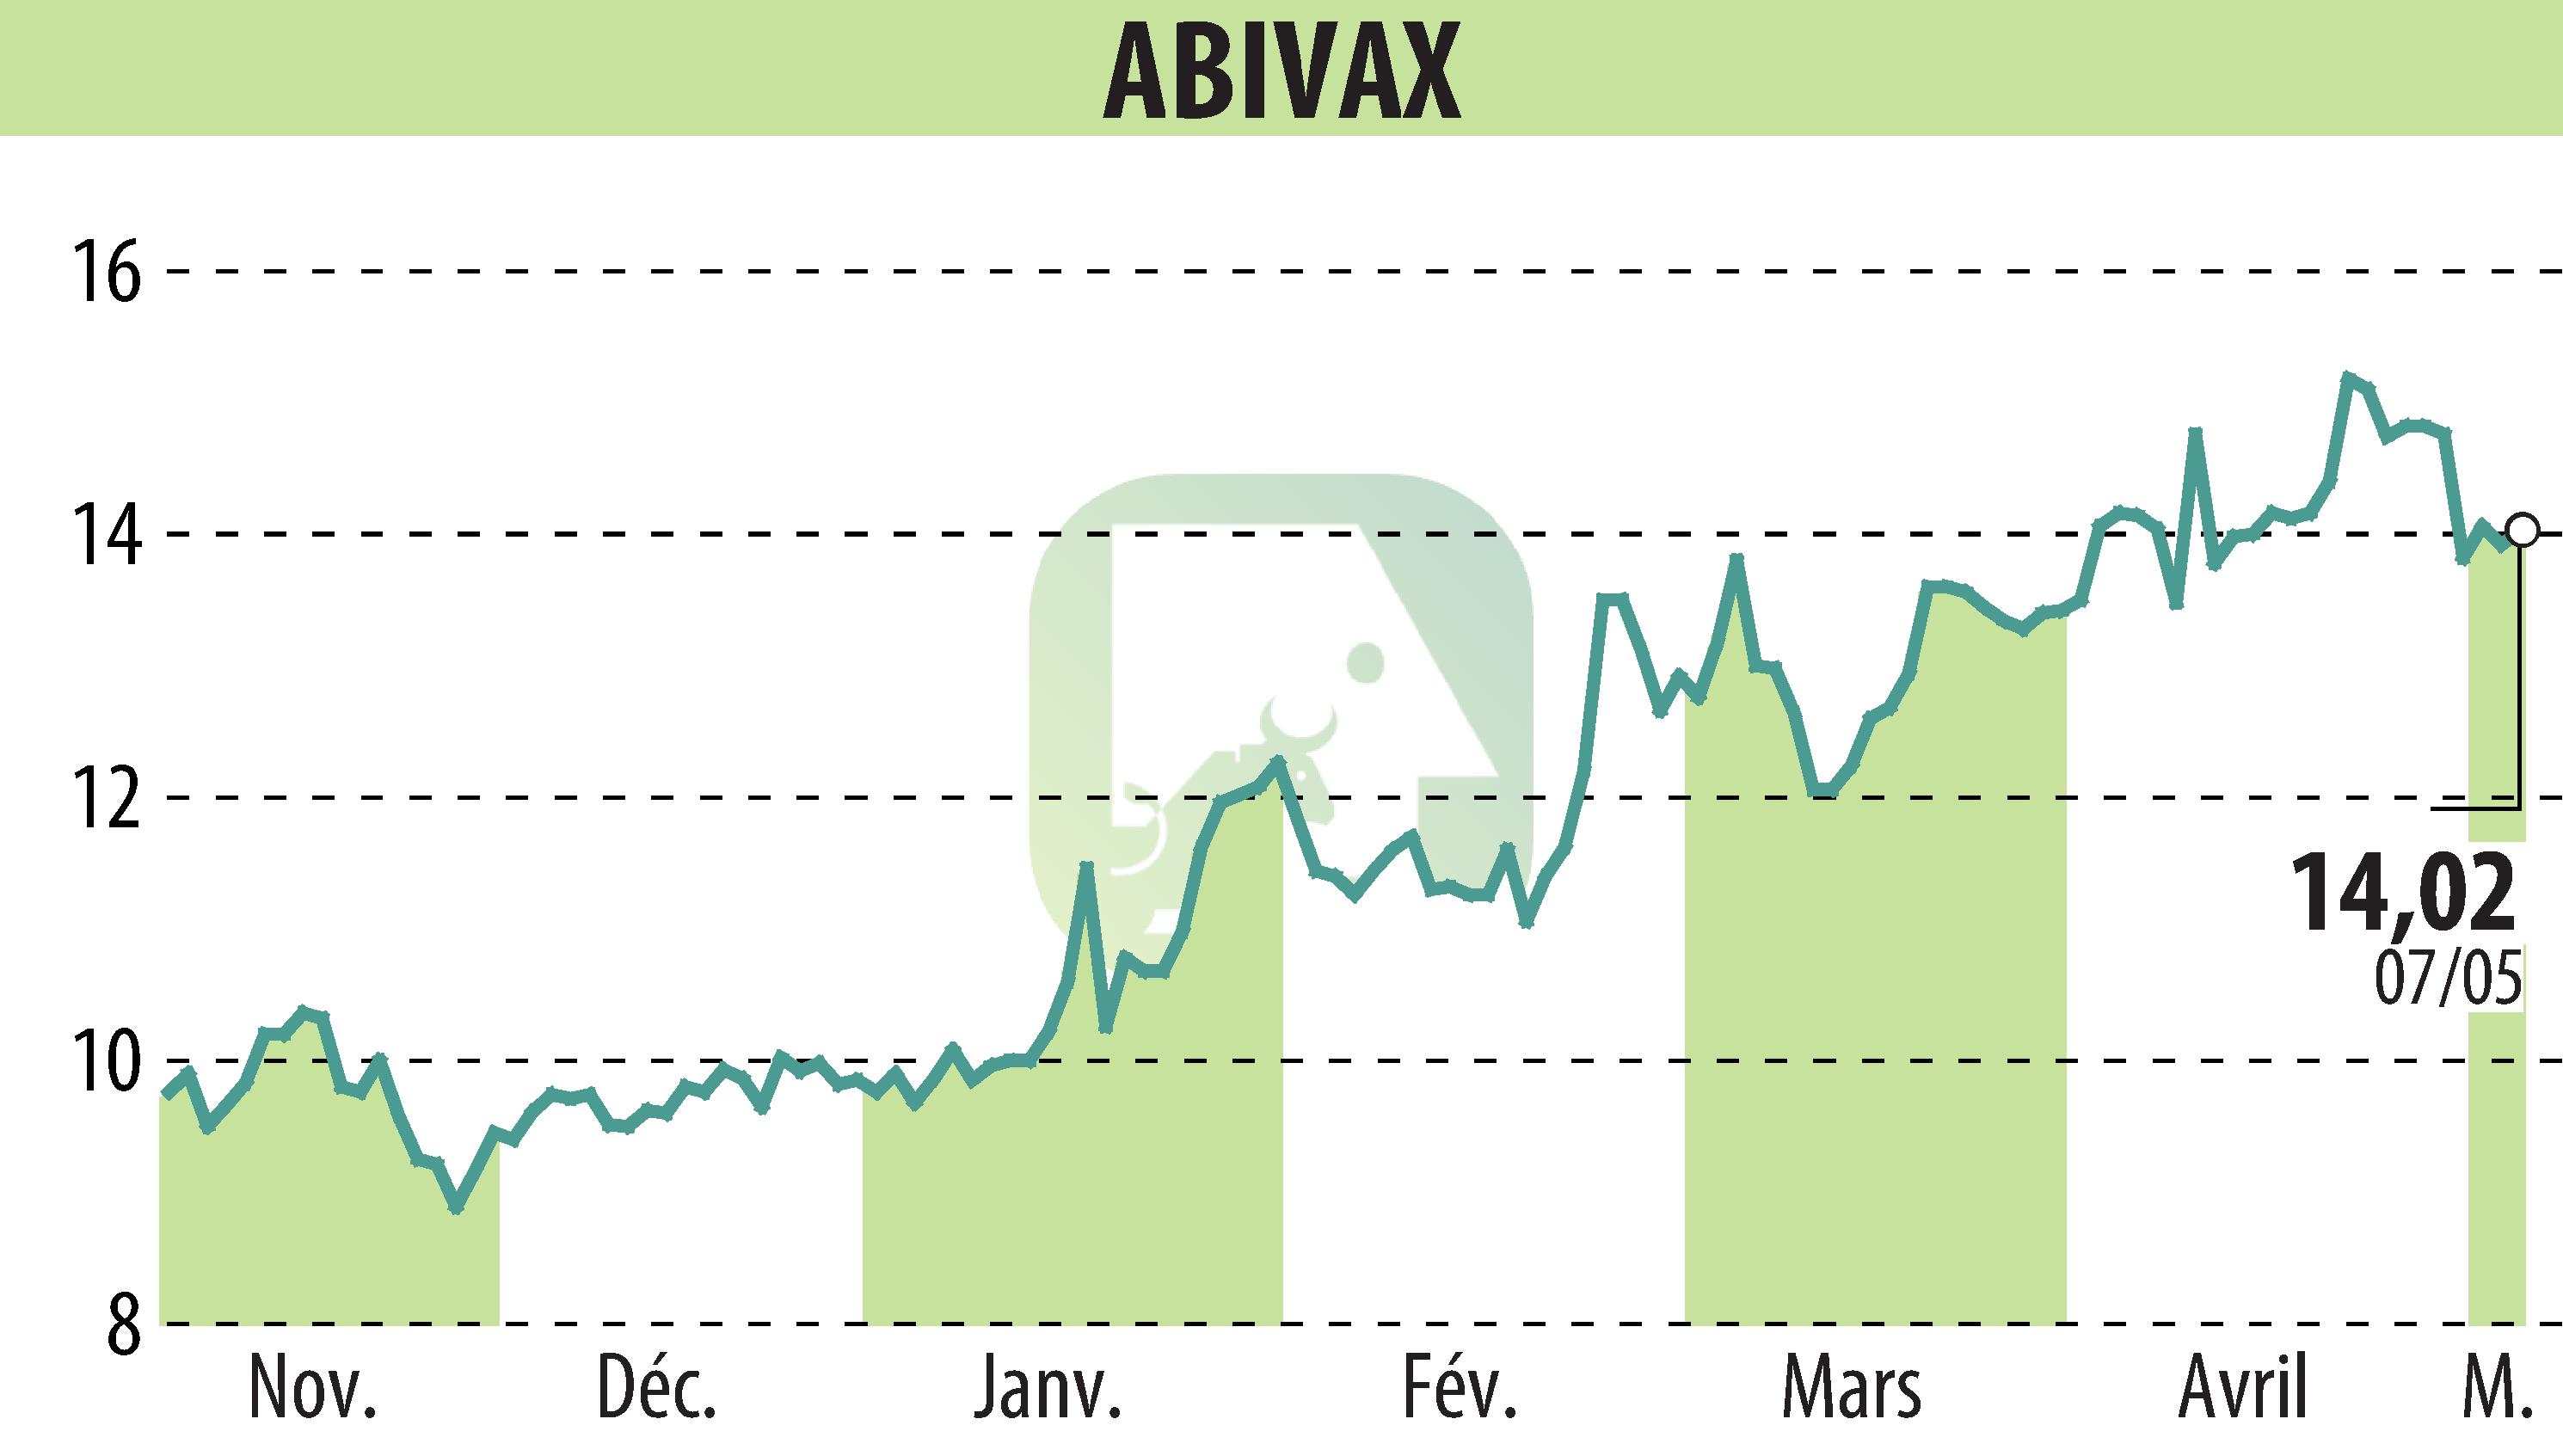 Stock price chart of ABIVAX (EPA:ABVX) showing fluctuations.